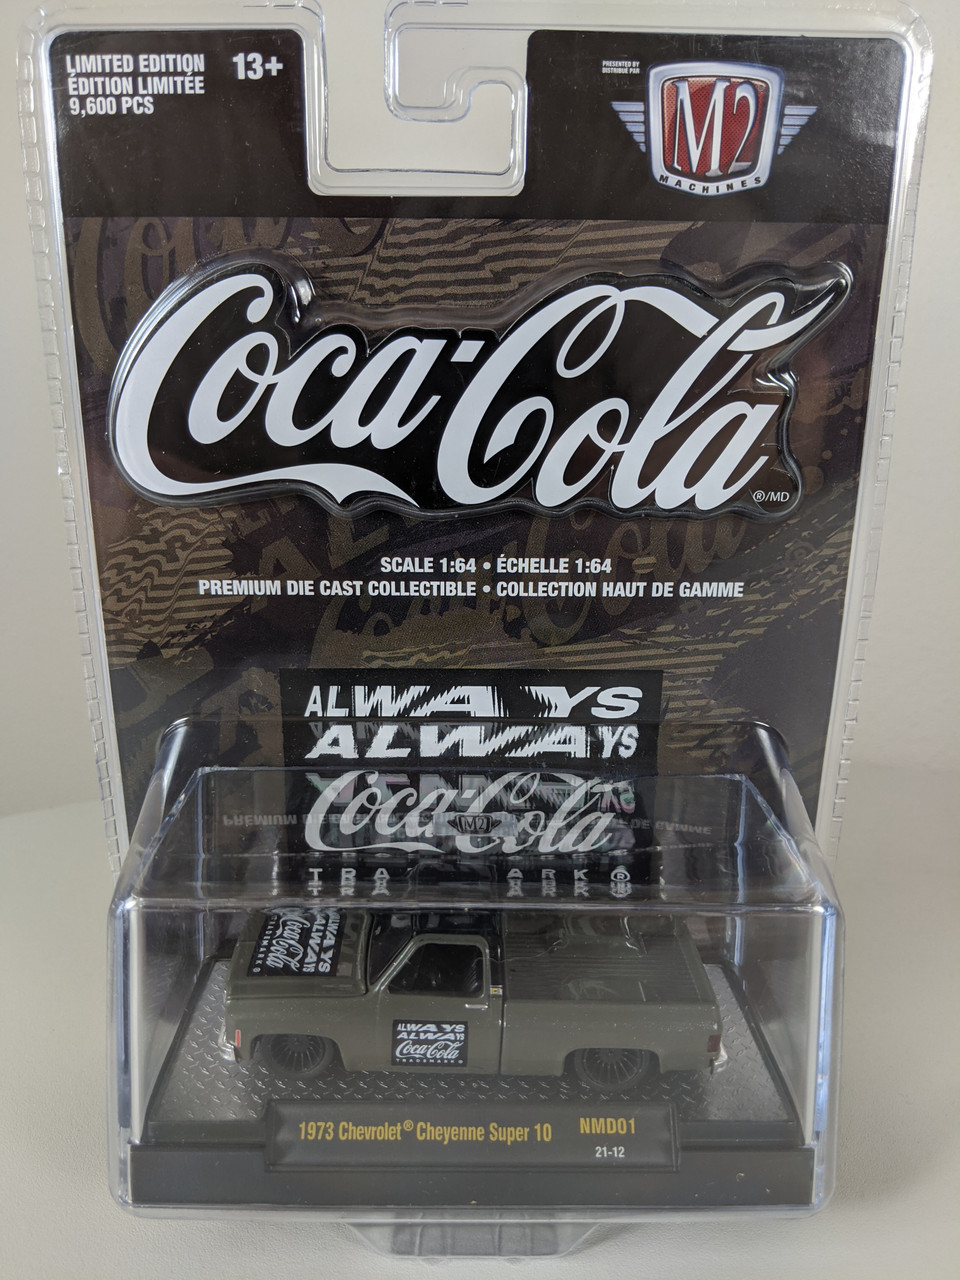 1:64 1973 Chevrolet Cheyenne Super 10 Square Body, Grey-Green with Coca  Cola graphics by M2